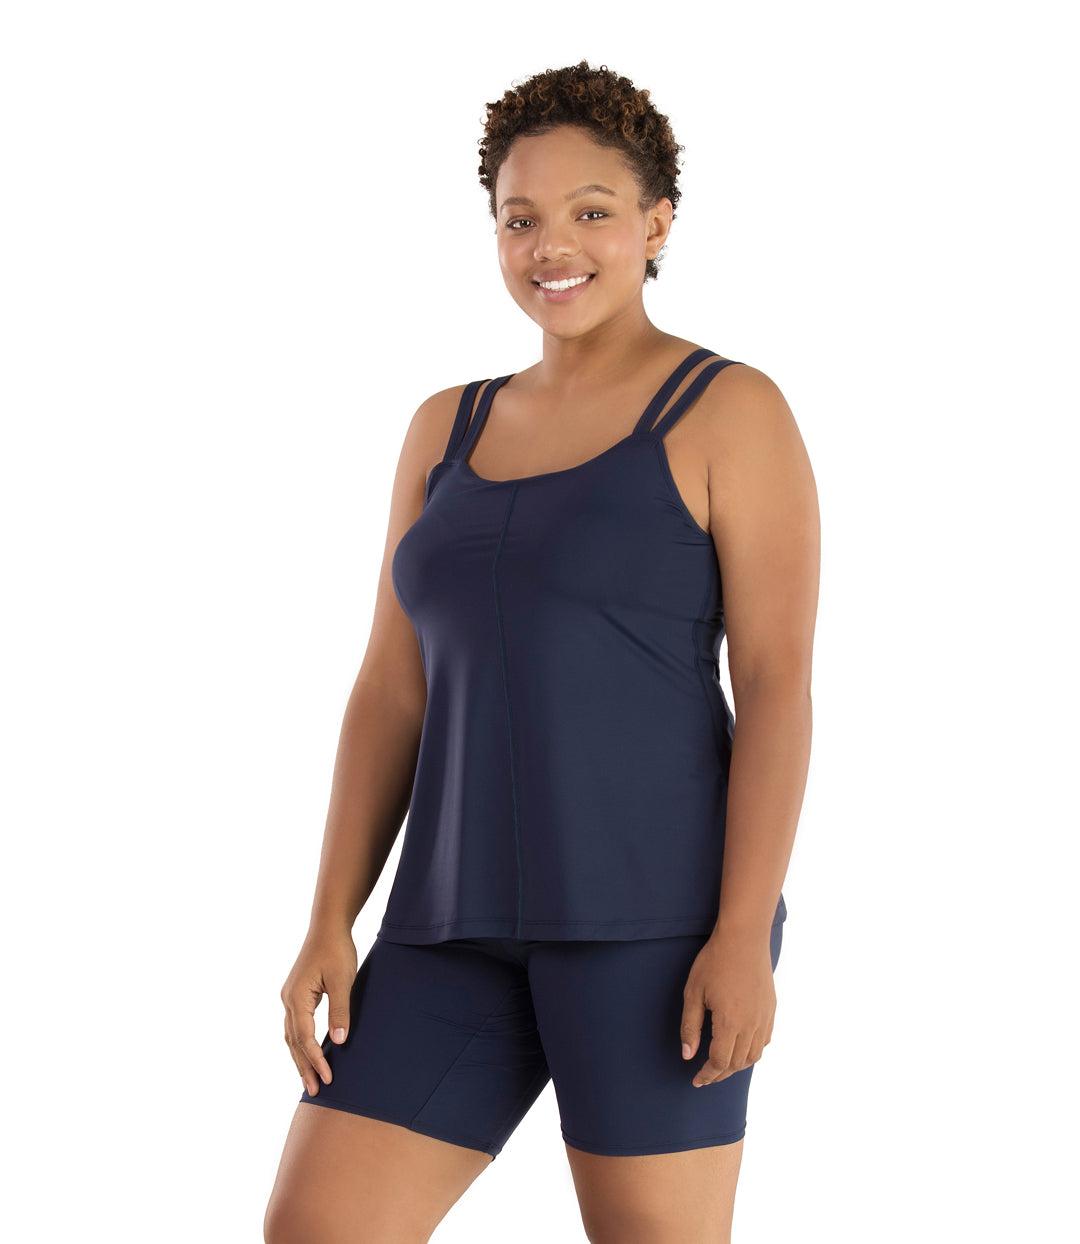 Plus size woman, facing front, wearing JunoActive plus size Junowear Hush Strappy Cami with Bra in Navy Blue. The woman is wearing a pair of Navy Blue Junowear Hush Boxer briefs.